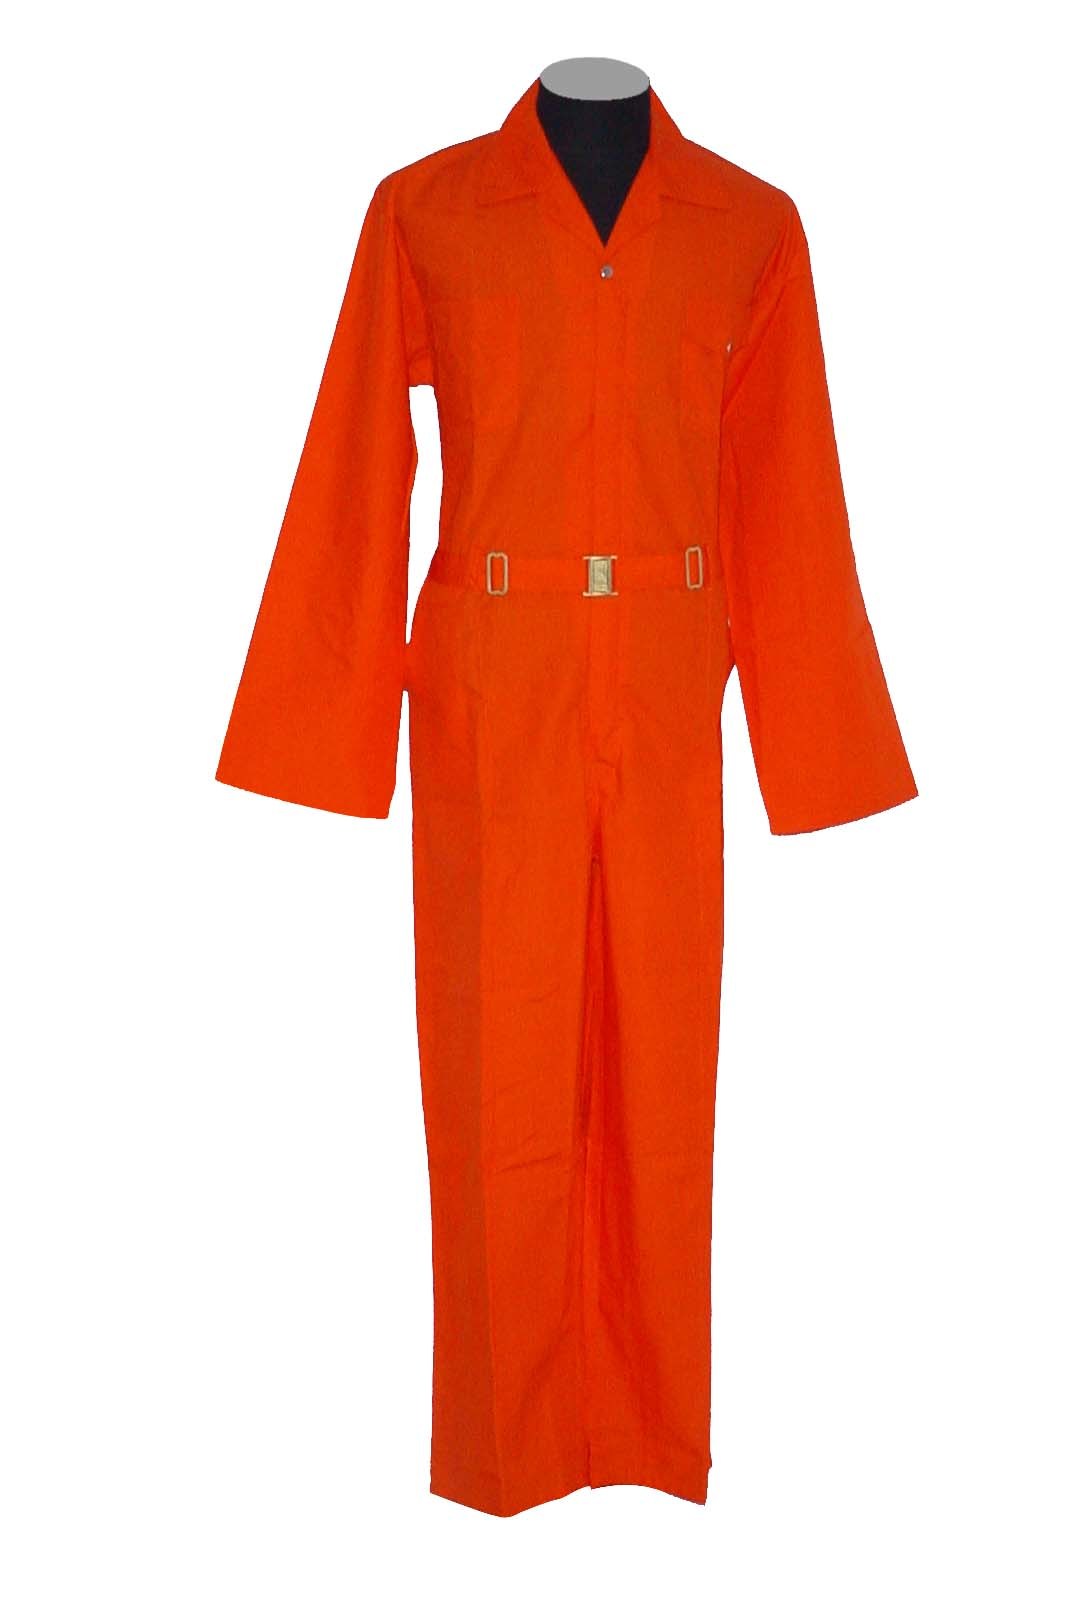 Coverall (A-006)